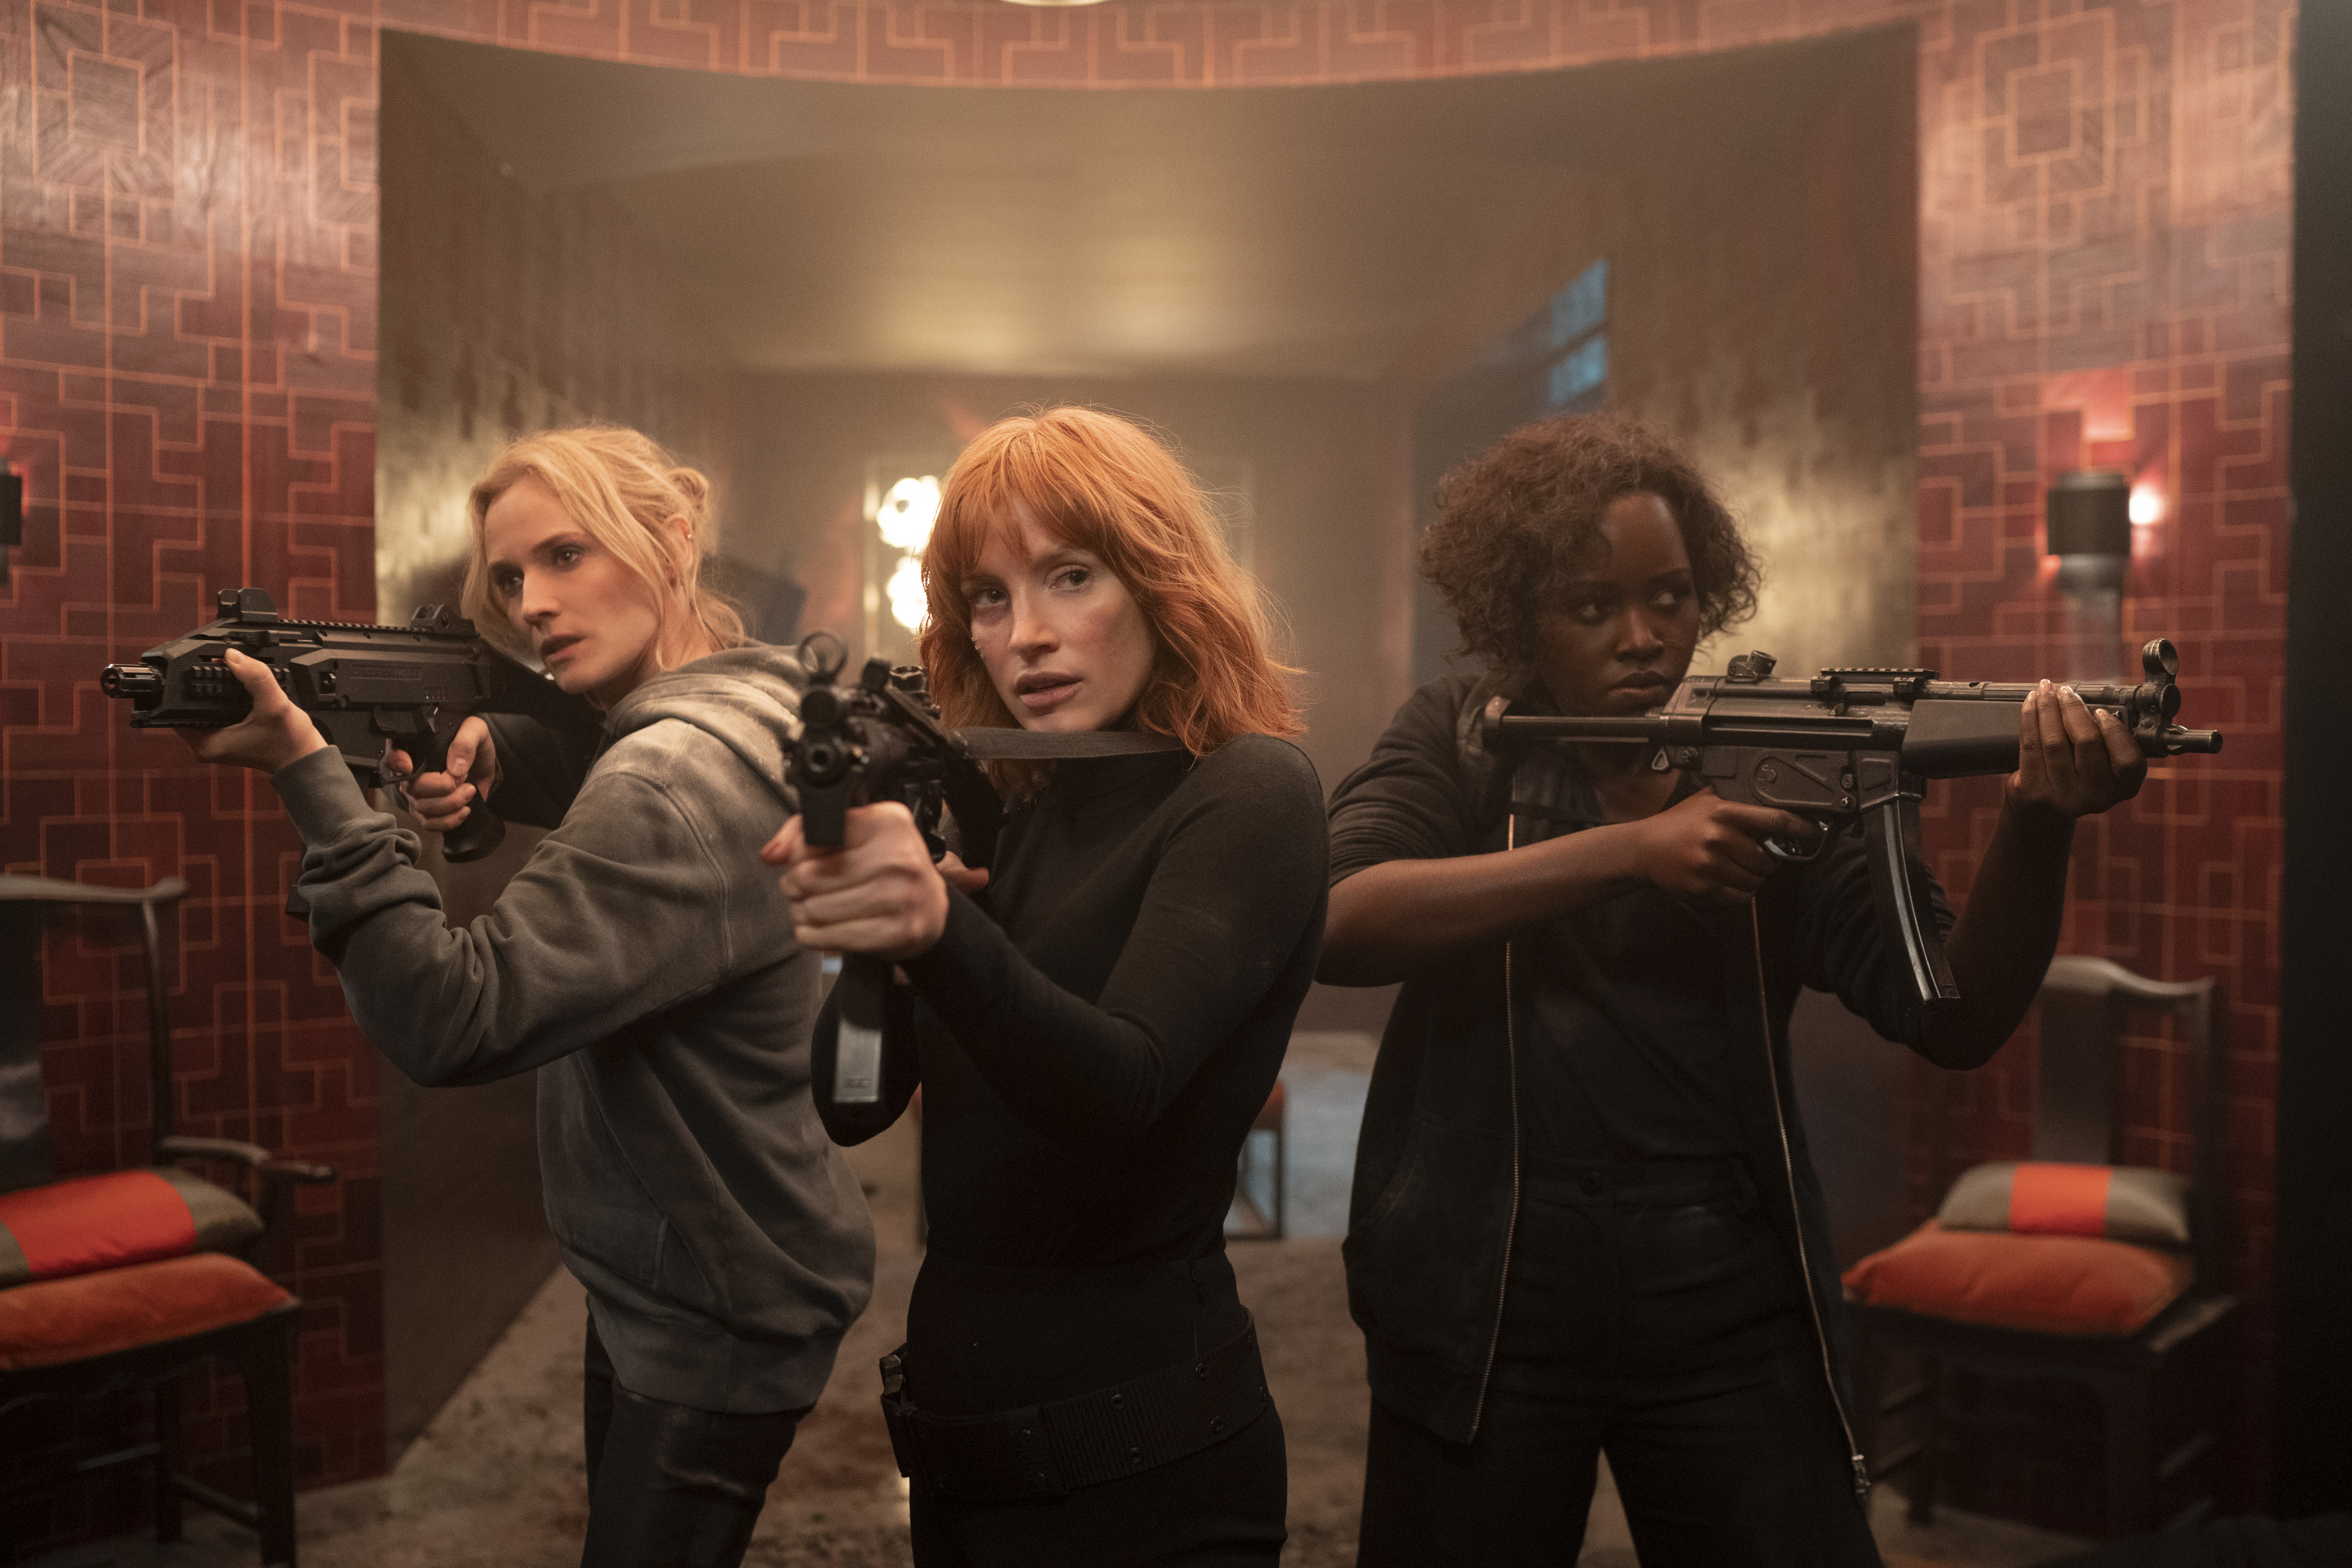 (from left) Marie (Diane Kruger), Mason “Mace” Brown (Jessica Chastain) and Khadijah (Lupita Nyong'o) in The 355, co-written and directed by Simon Kinberg. (Universal Pictures)